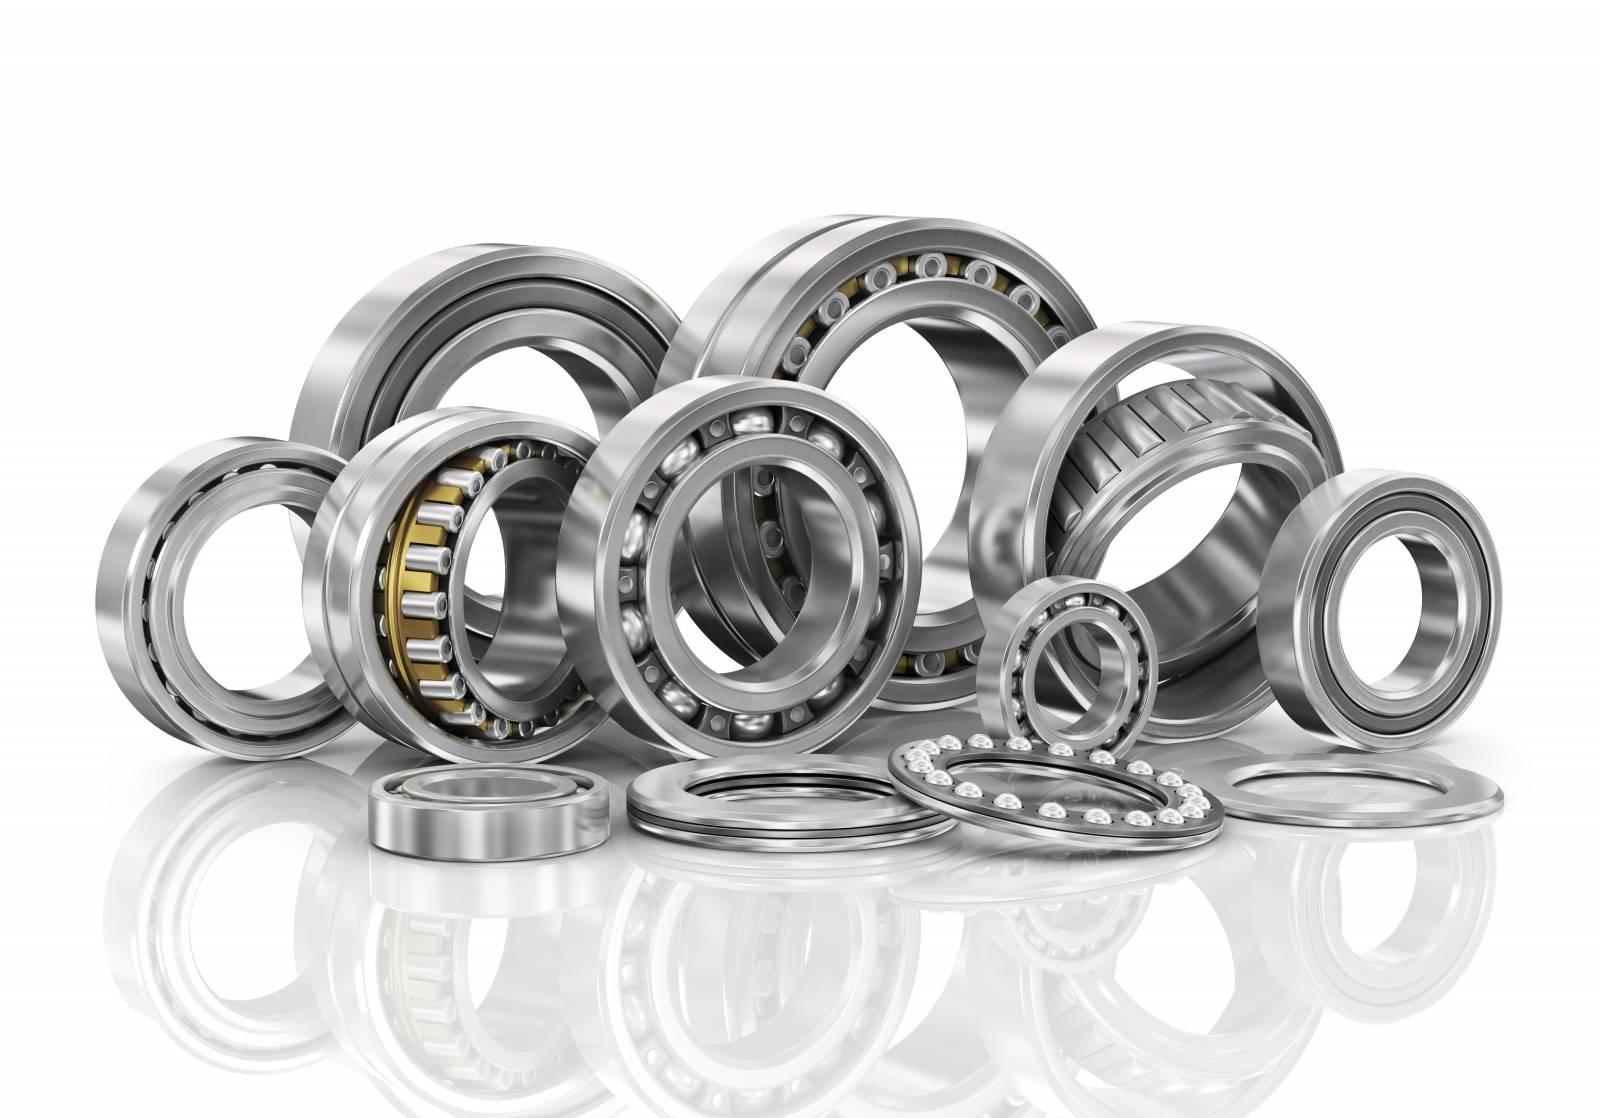 Product Products - The Bearing People image